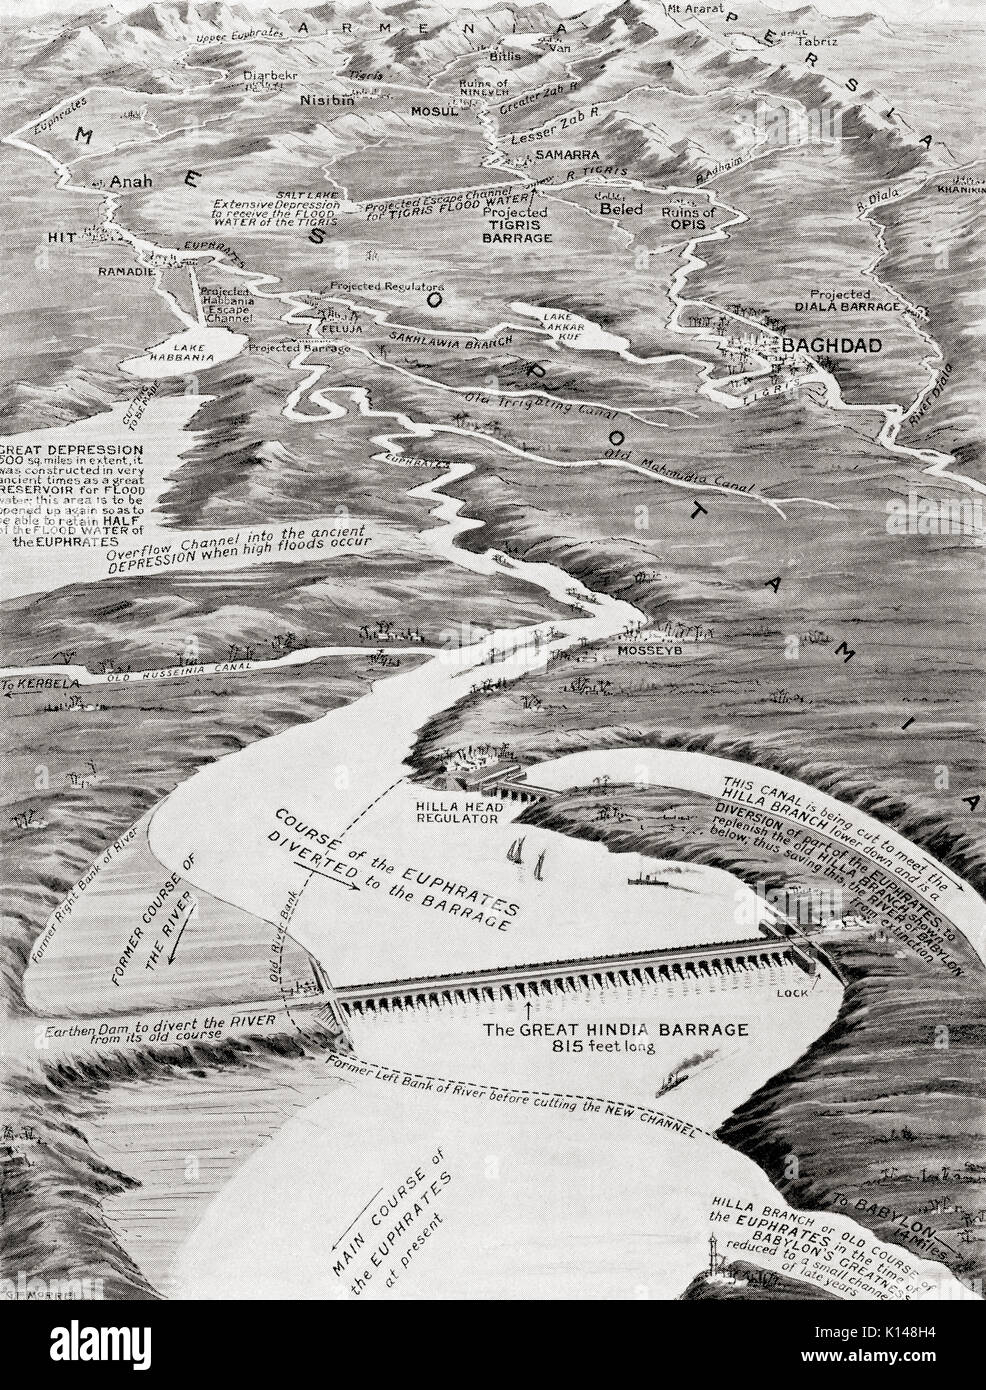 Bird's-eye view of Mesopotamia showing William Willcock's proposed scheme of irrigation.  In addition to the construction of the Hindia Barrage, it includes the suggestion of drawing the flood water of the Euphrates and the Tigris into two depressions which would act as natural reservoirs and prevent flooding.  From Hutchinson's History of the Nations, published 1915. Stock Photo